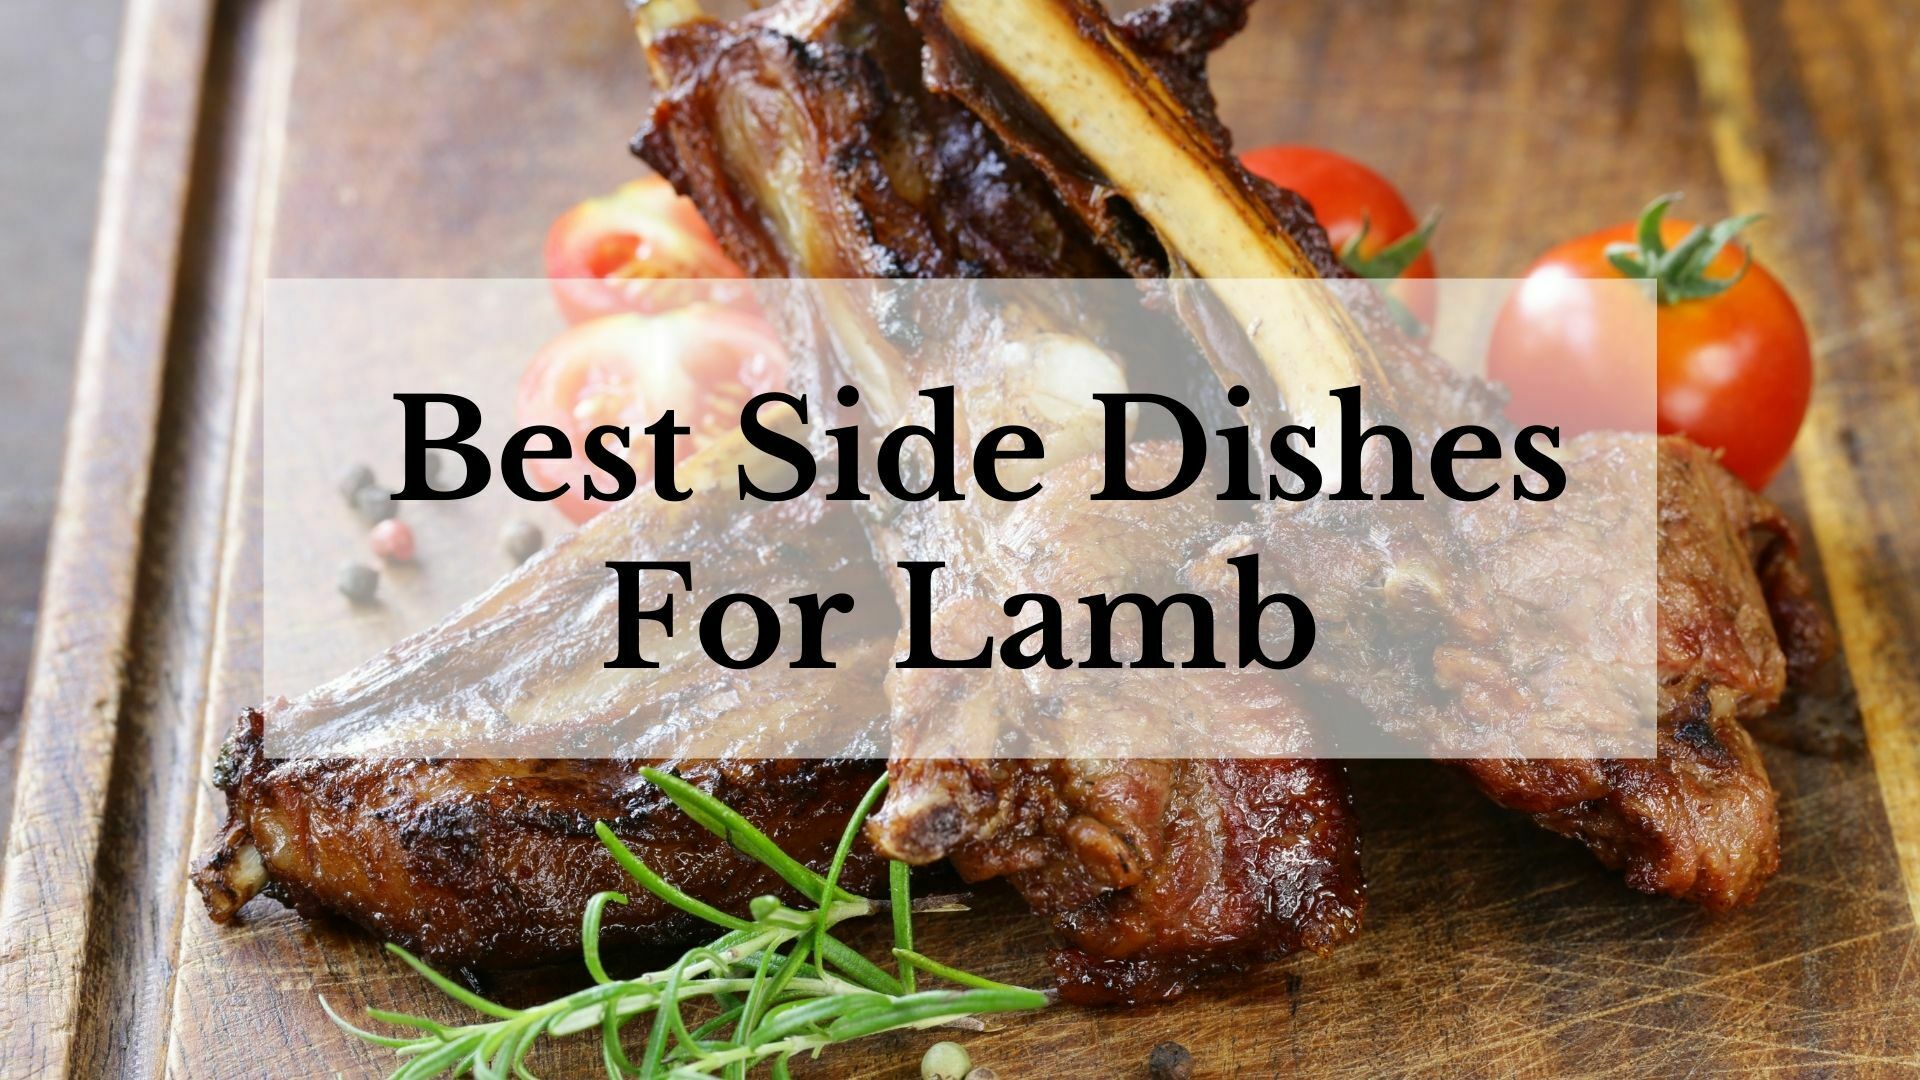 Best Side Dishes For Lamb